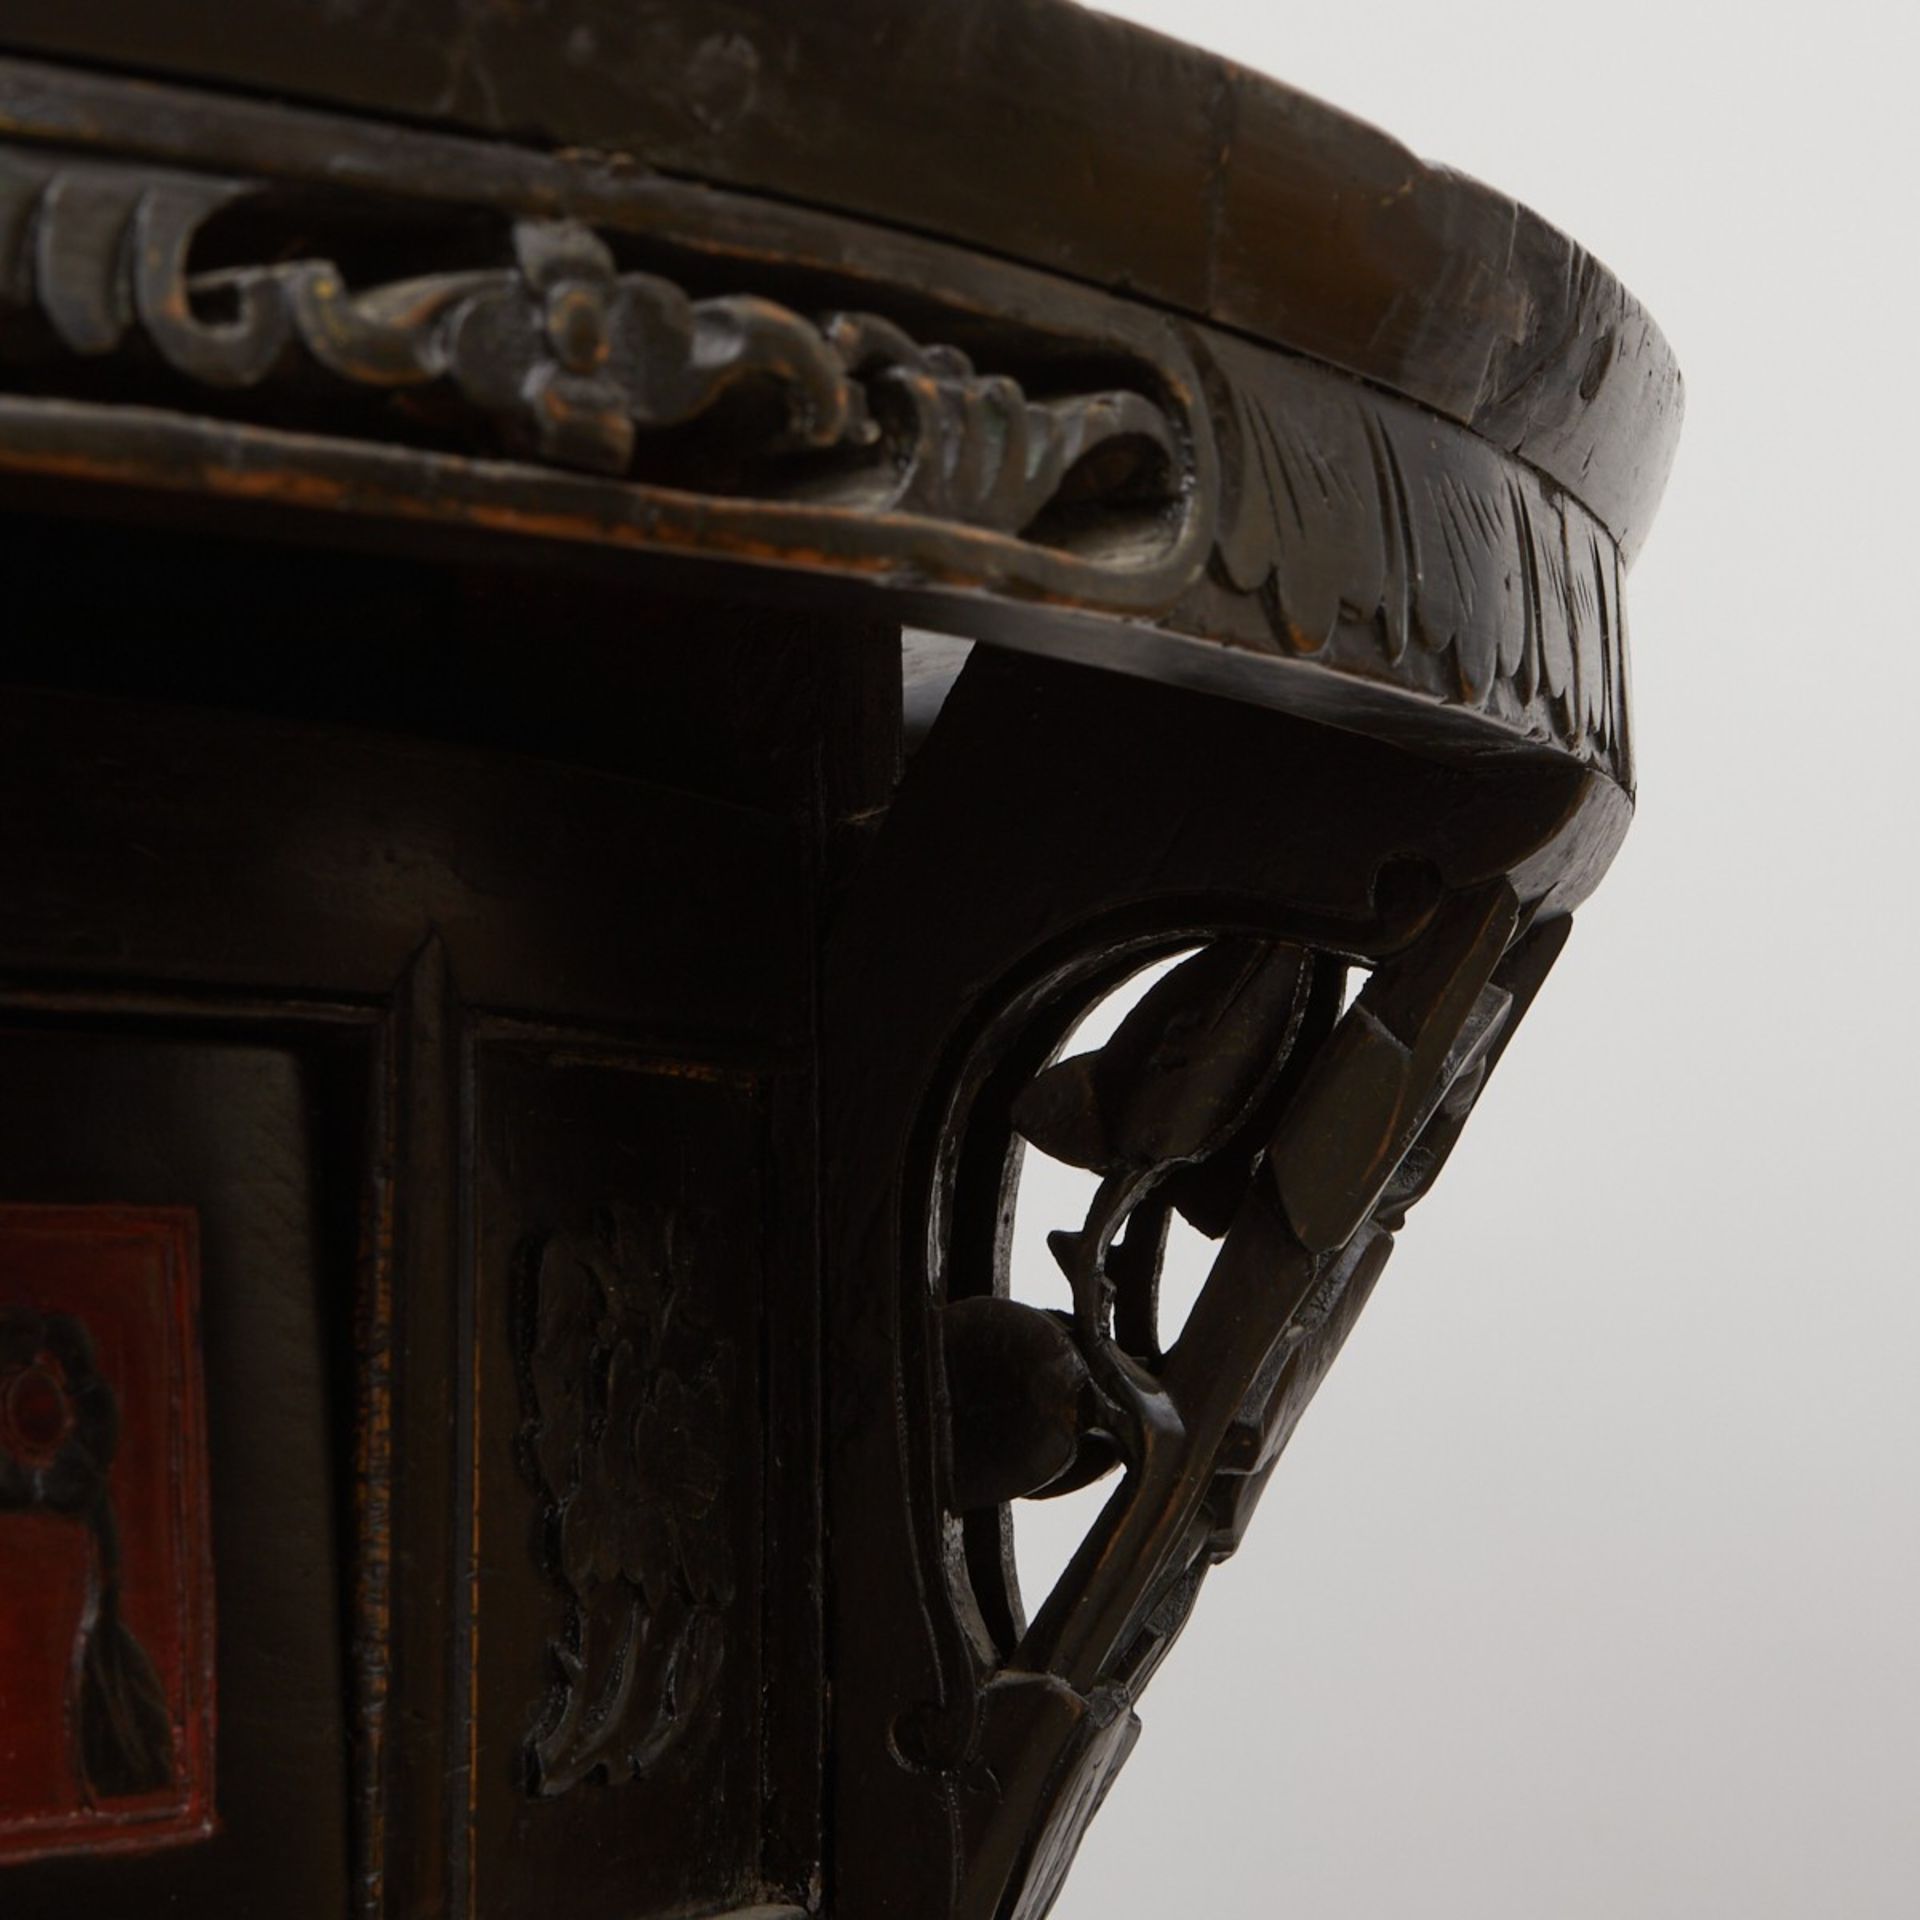 Chinese Round Carved Wood Table w/ Drawers 19th c. - Image 10 of 11